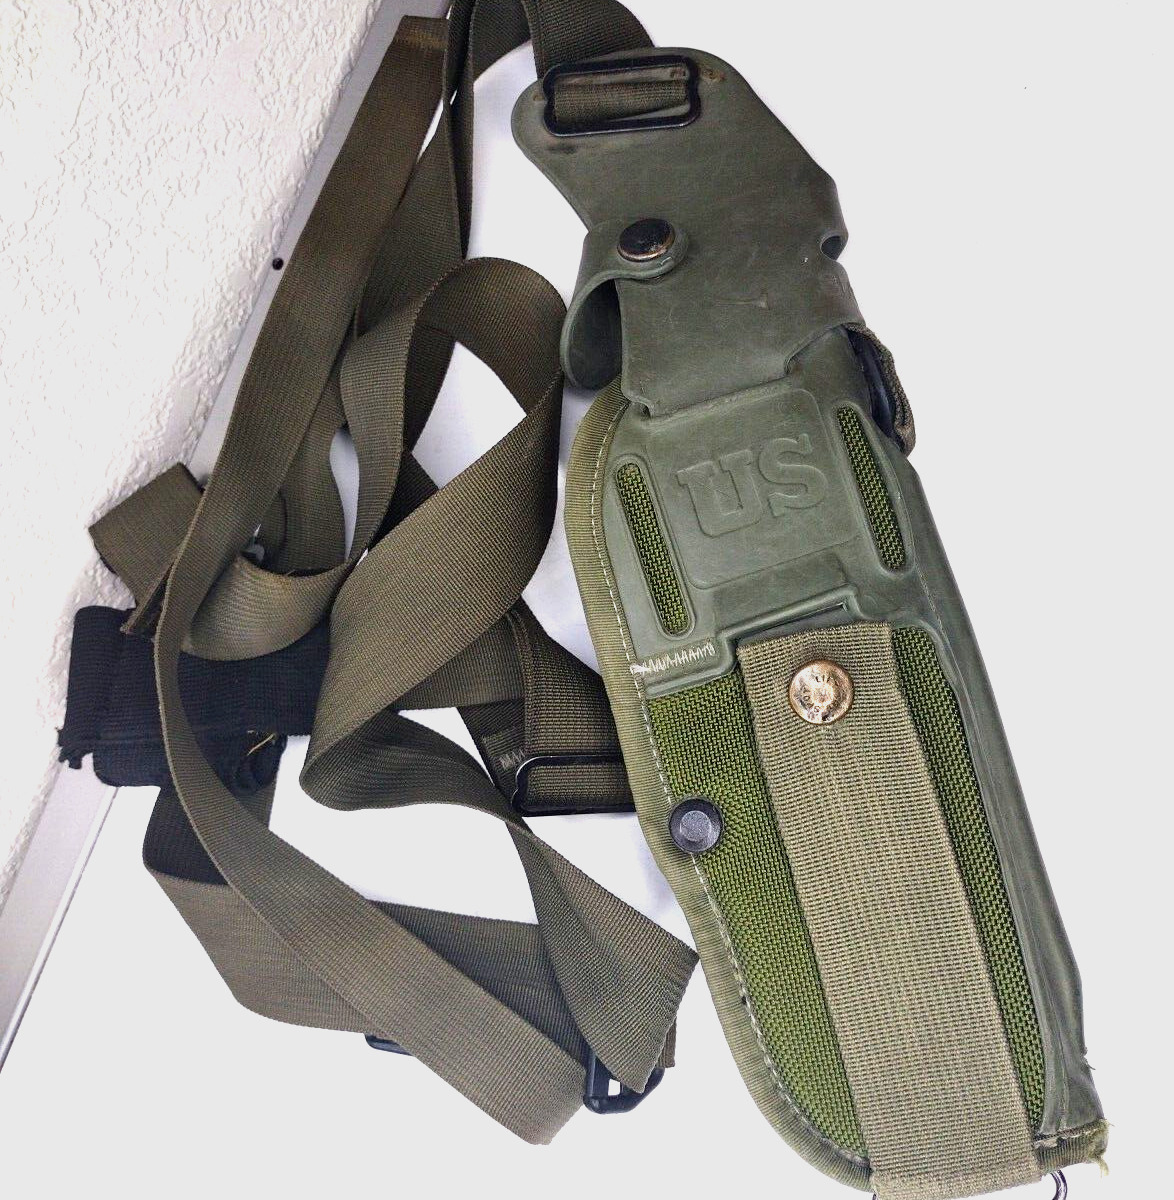 VTG Bianchi M12 Holster & UM84H Harness US Armed Forces Universal Military Issue